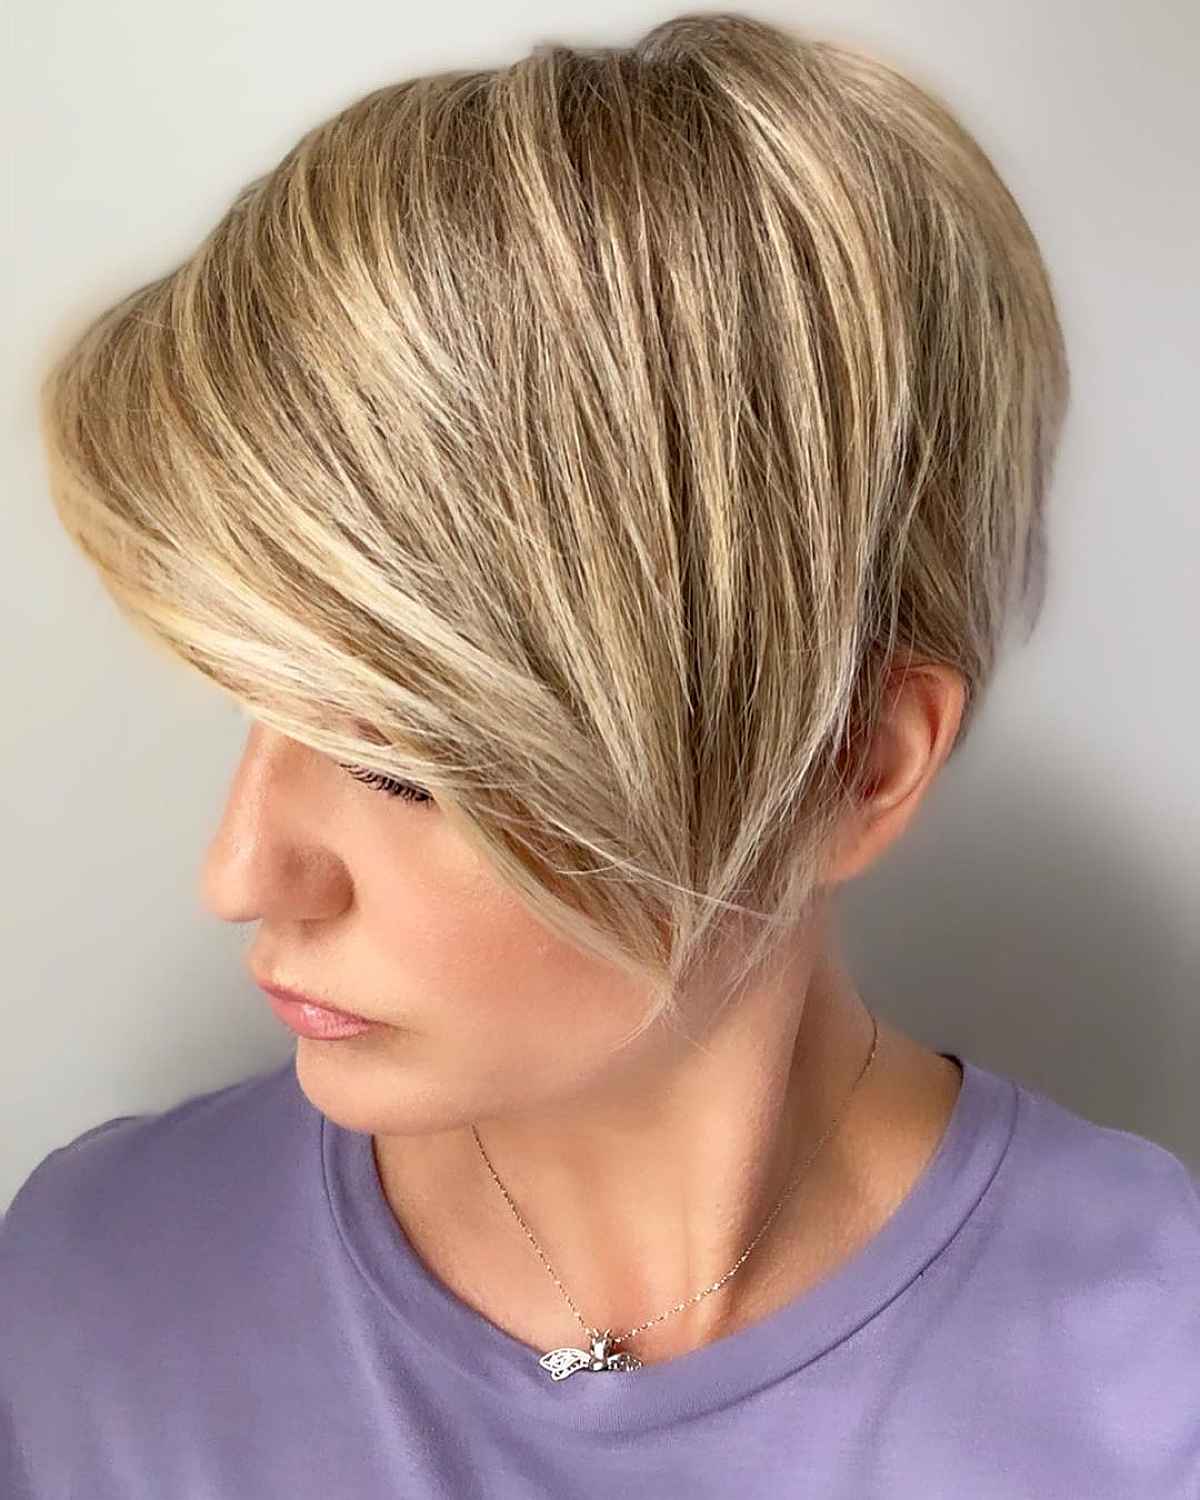 15 Short, Stacked Pixie Bob Haircuts for a Cute and Sassy Look